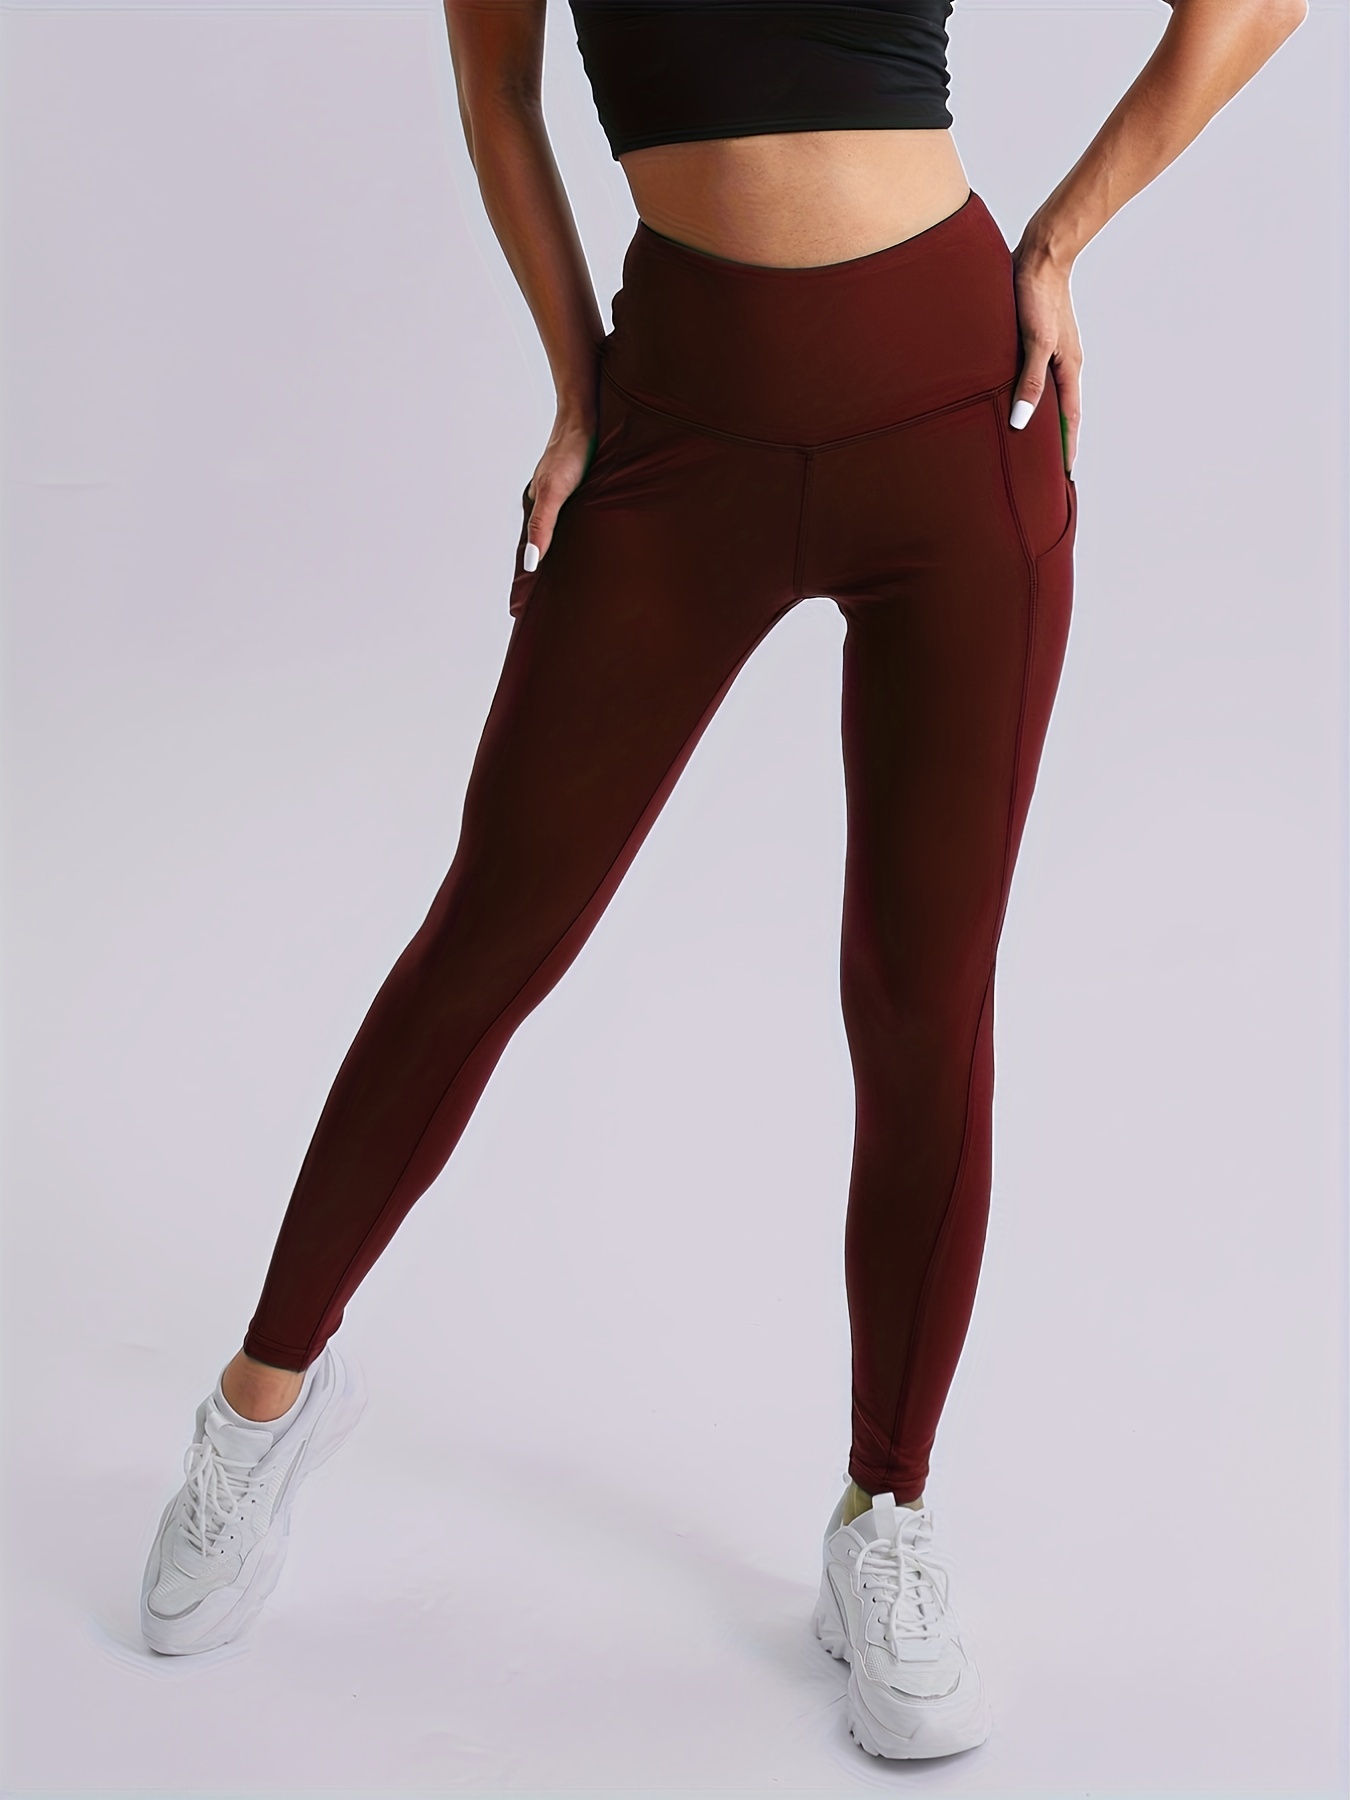 JWZUY Women's Leggings High Waisted Yoga Trousers Workout Exercise Casual  Pants Wine S 